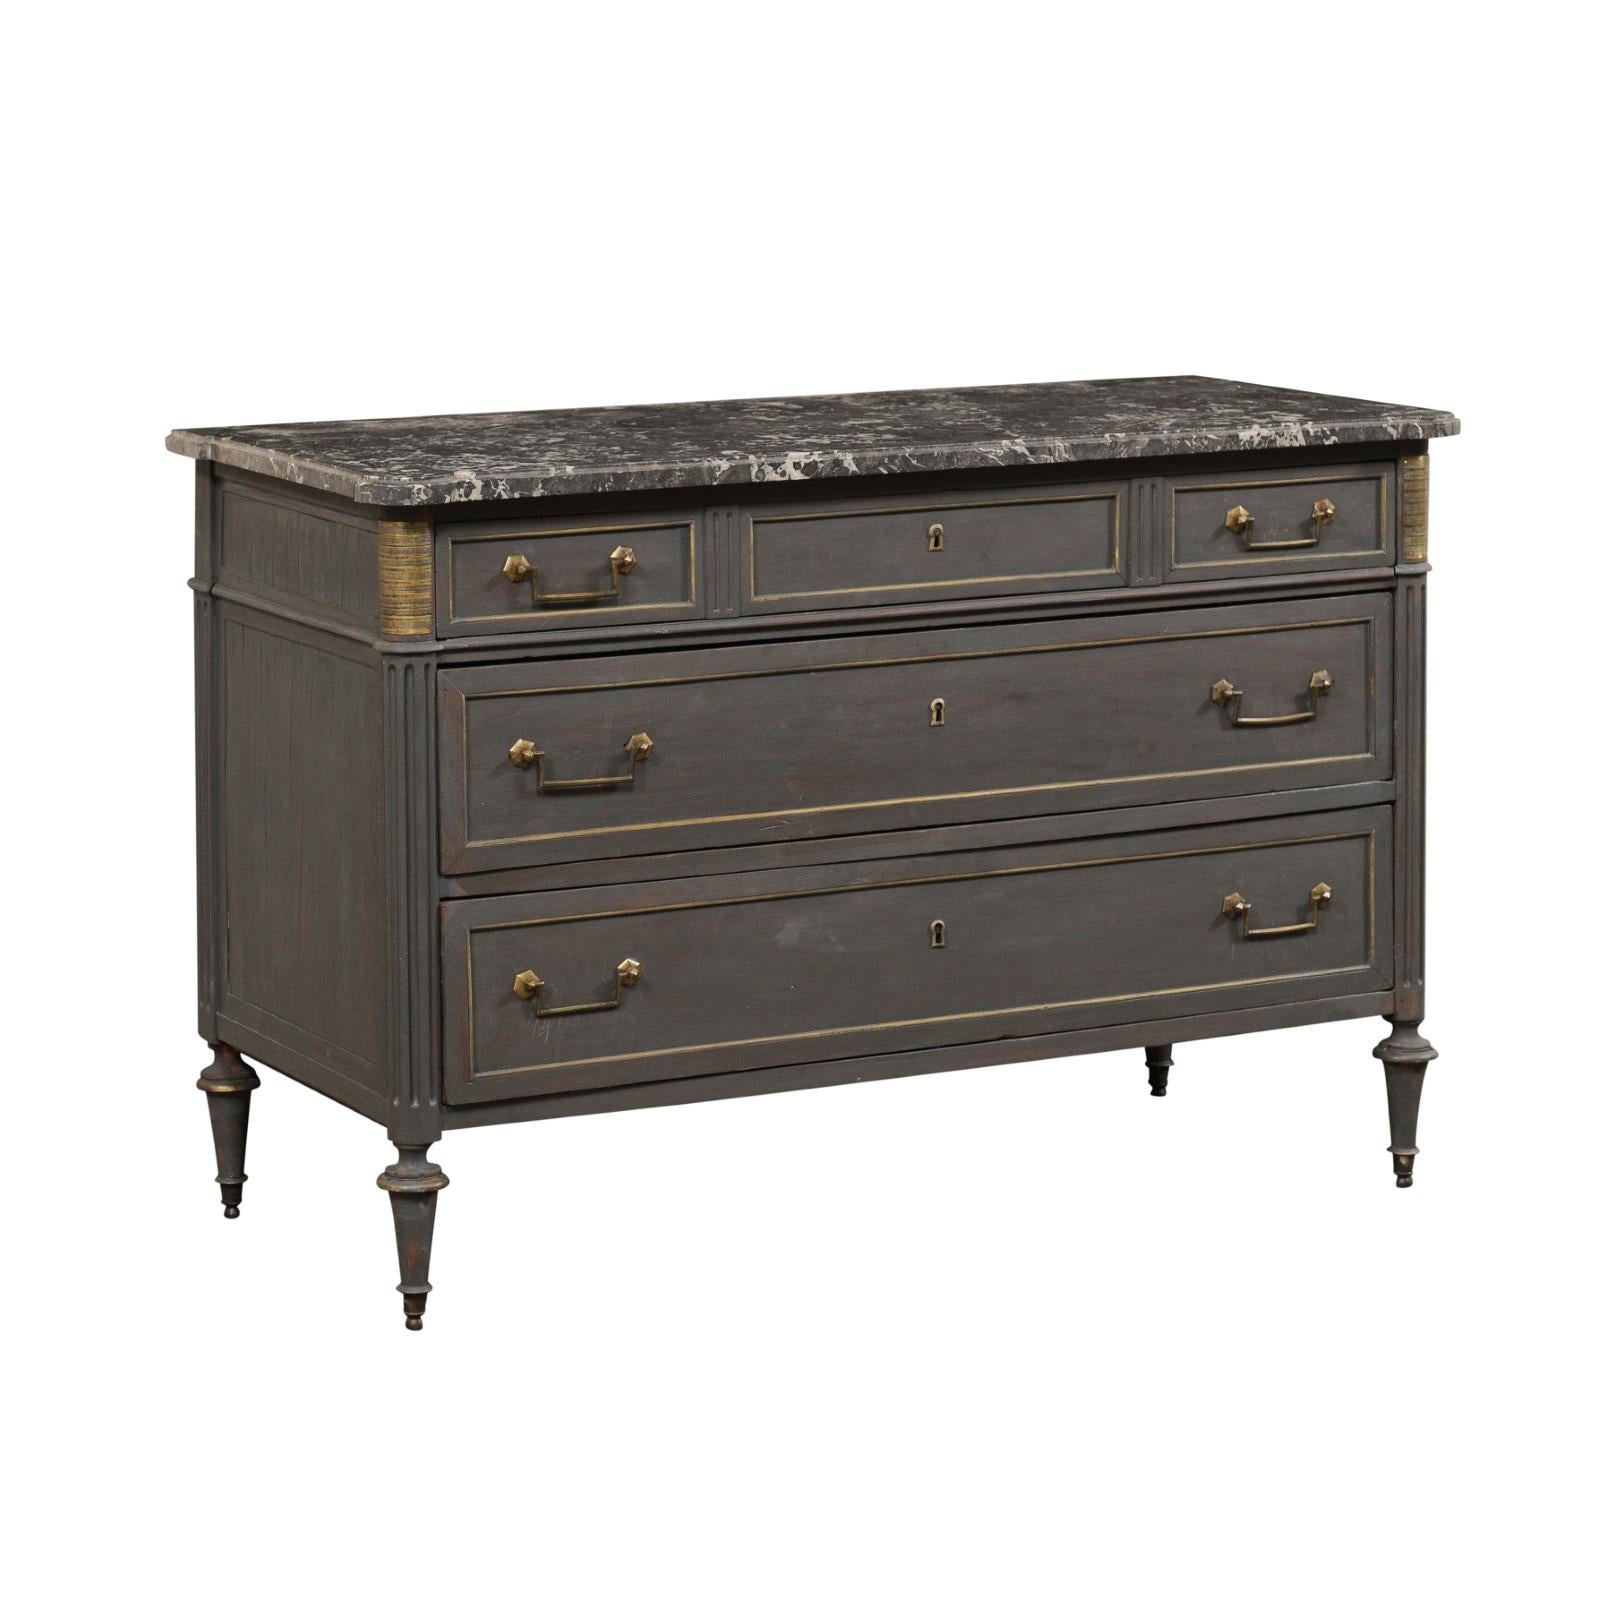 A French neoclassical style chest of drawers with marble top from the 19th century. This antique chest from France features a rectangular-shaped marble top, with pronounced rounded corners, which rests atop a neoclassical style case with rounded and